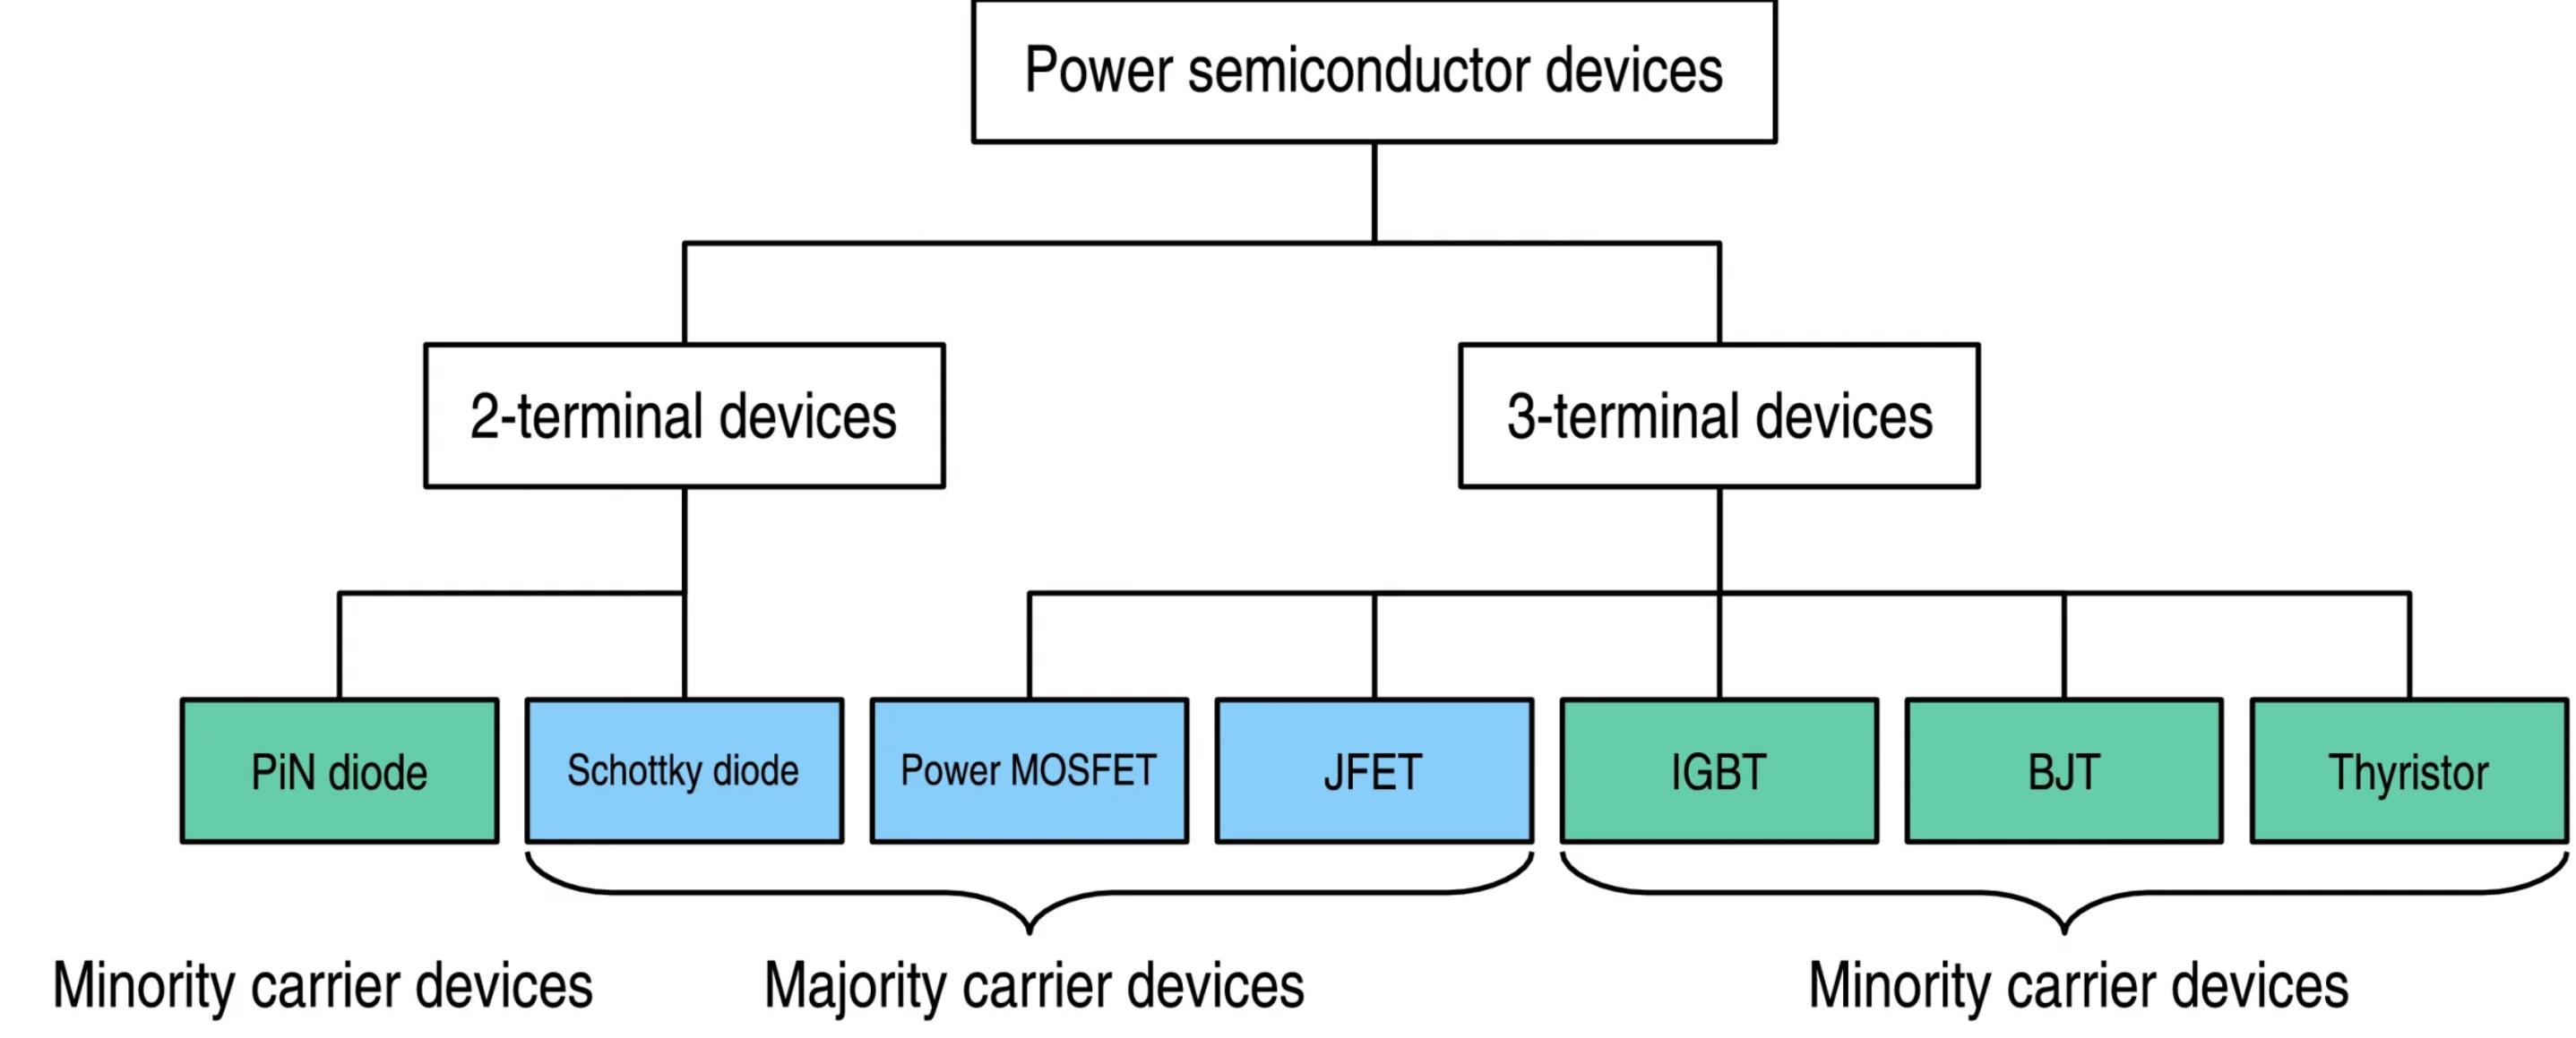 Semiconductor Industry PCBA